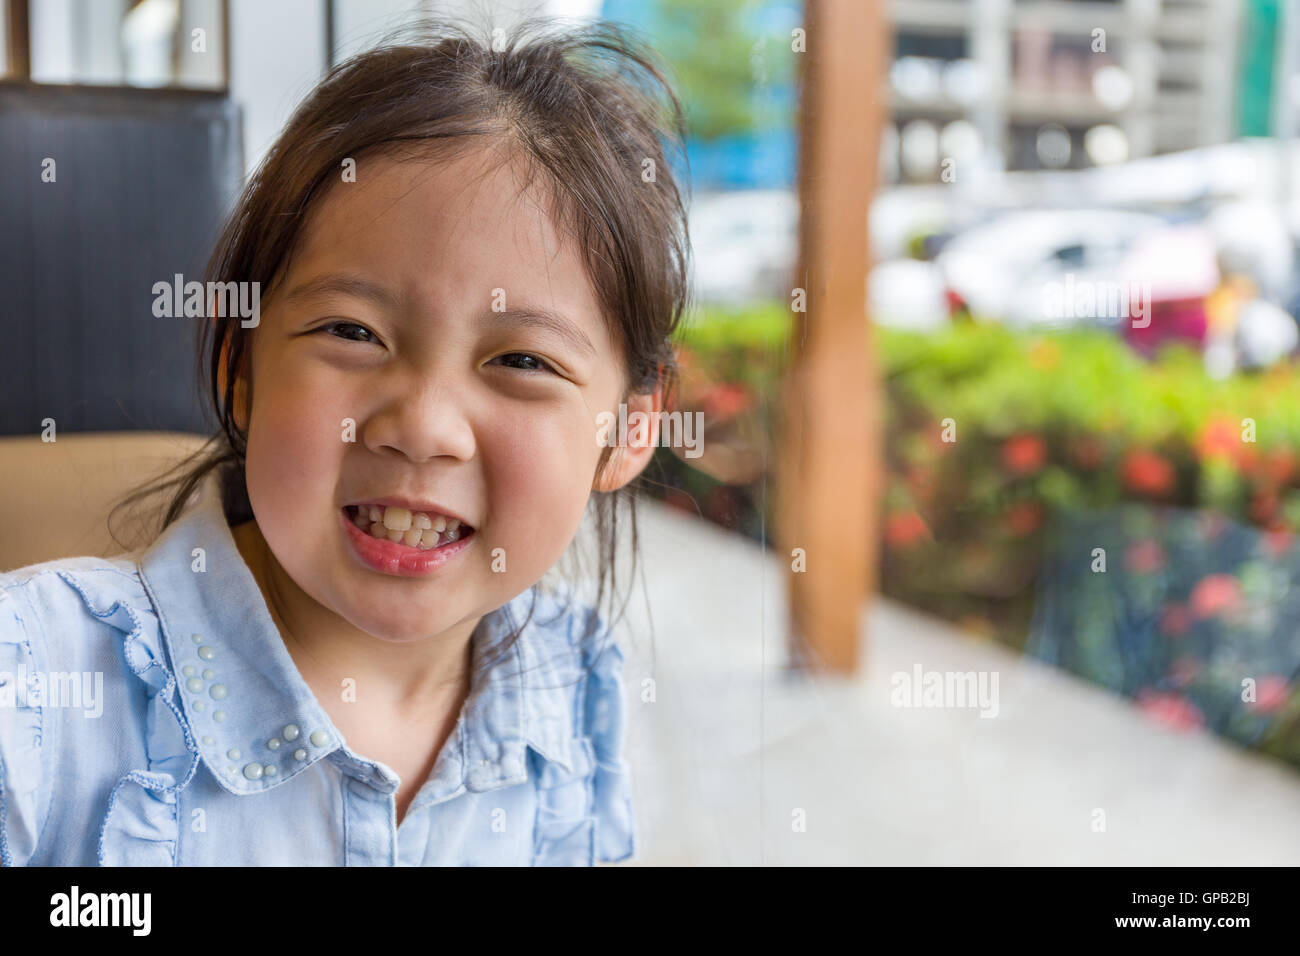 Happy Asian child or kid smiling portrait. Stock Photo